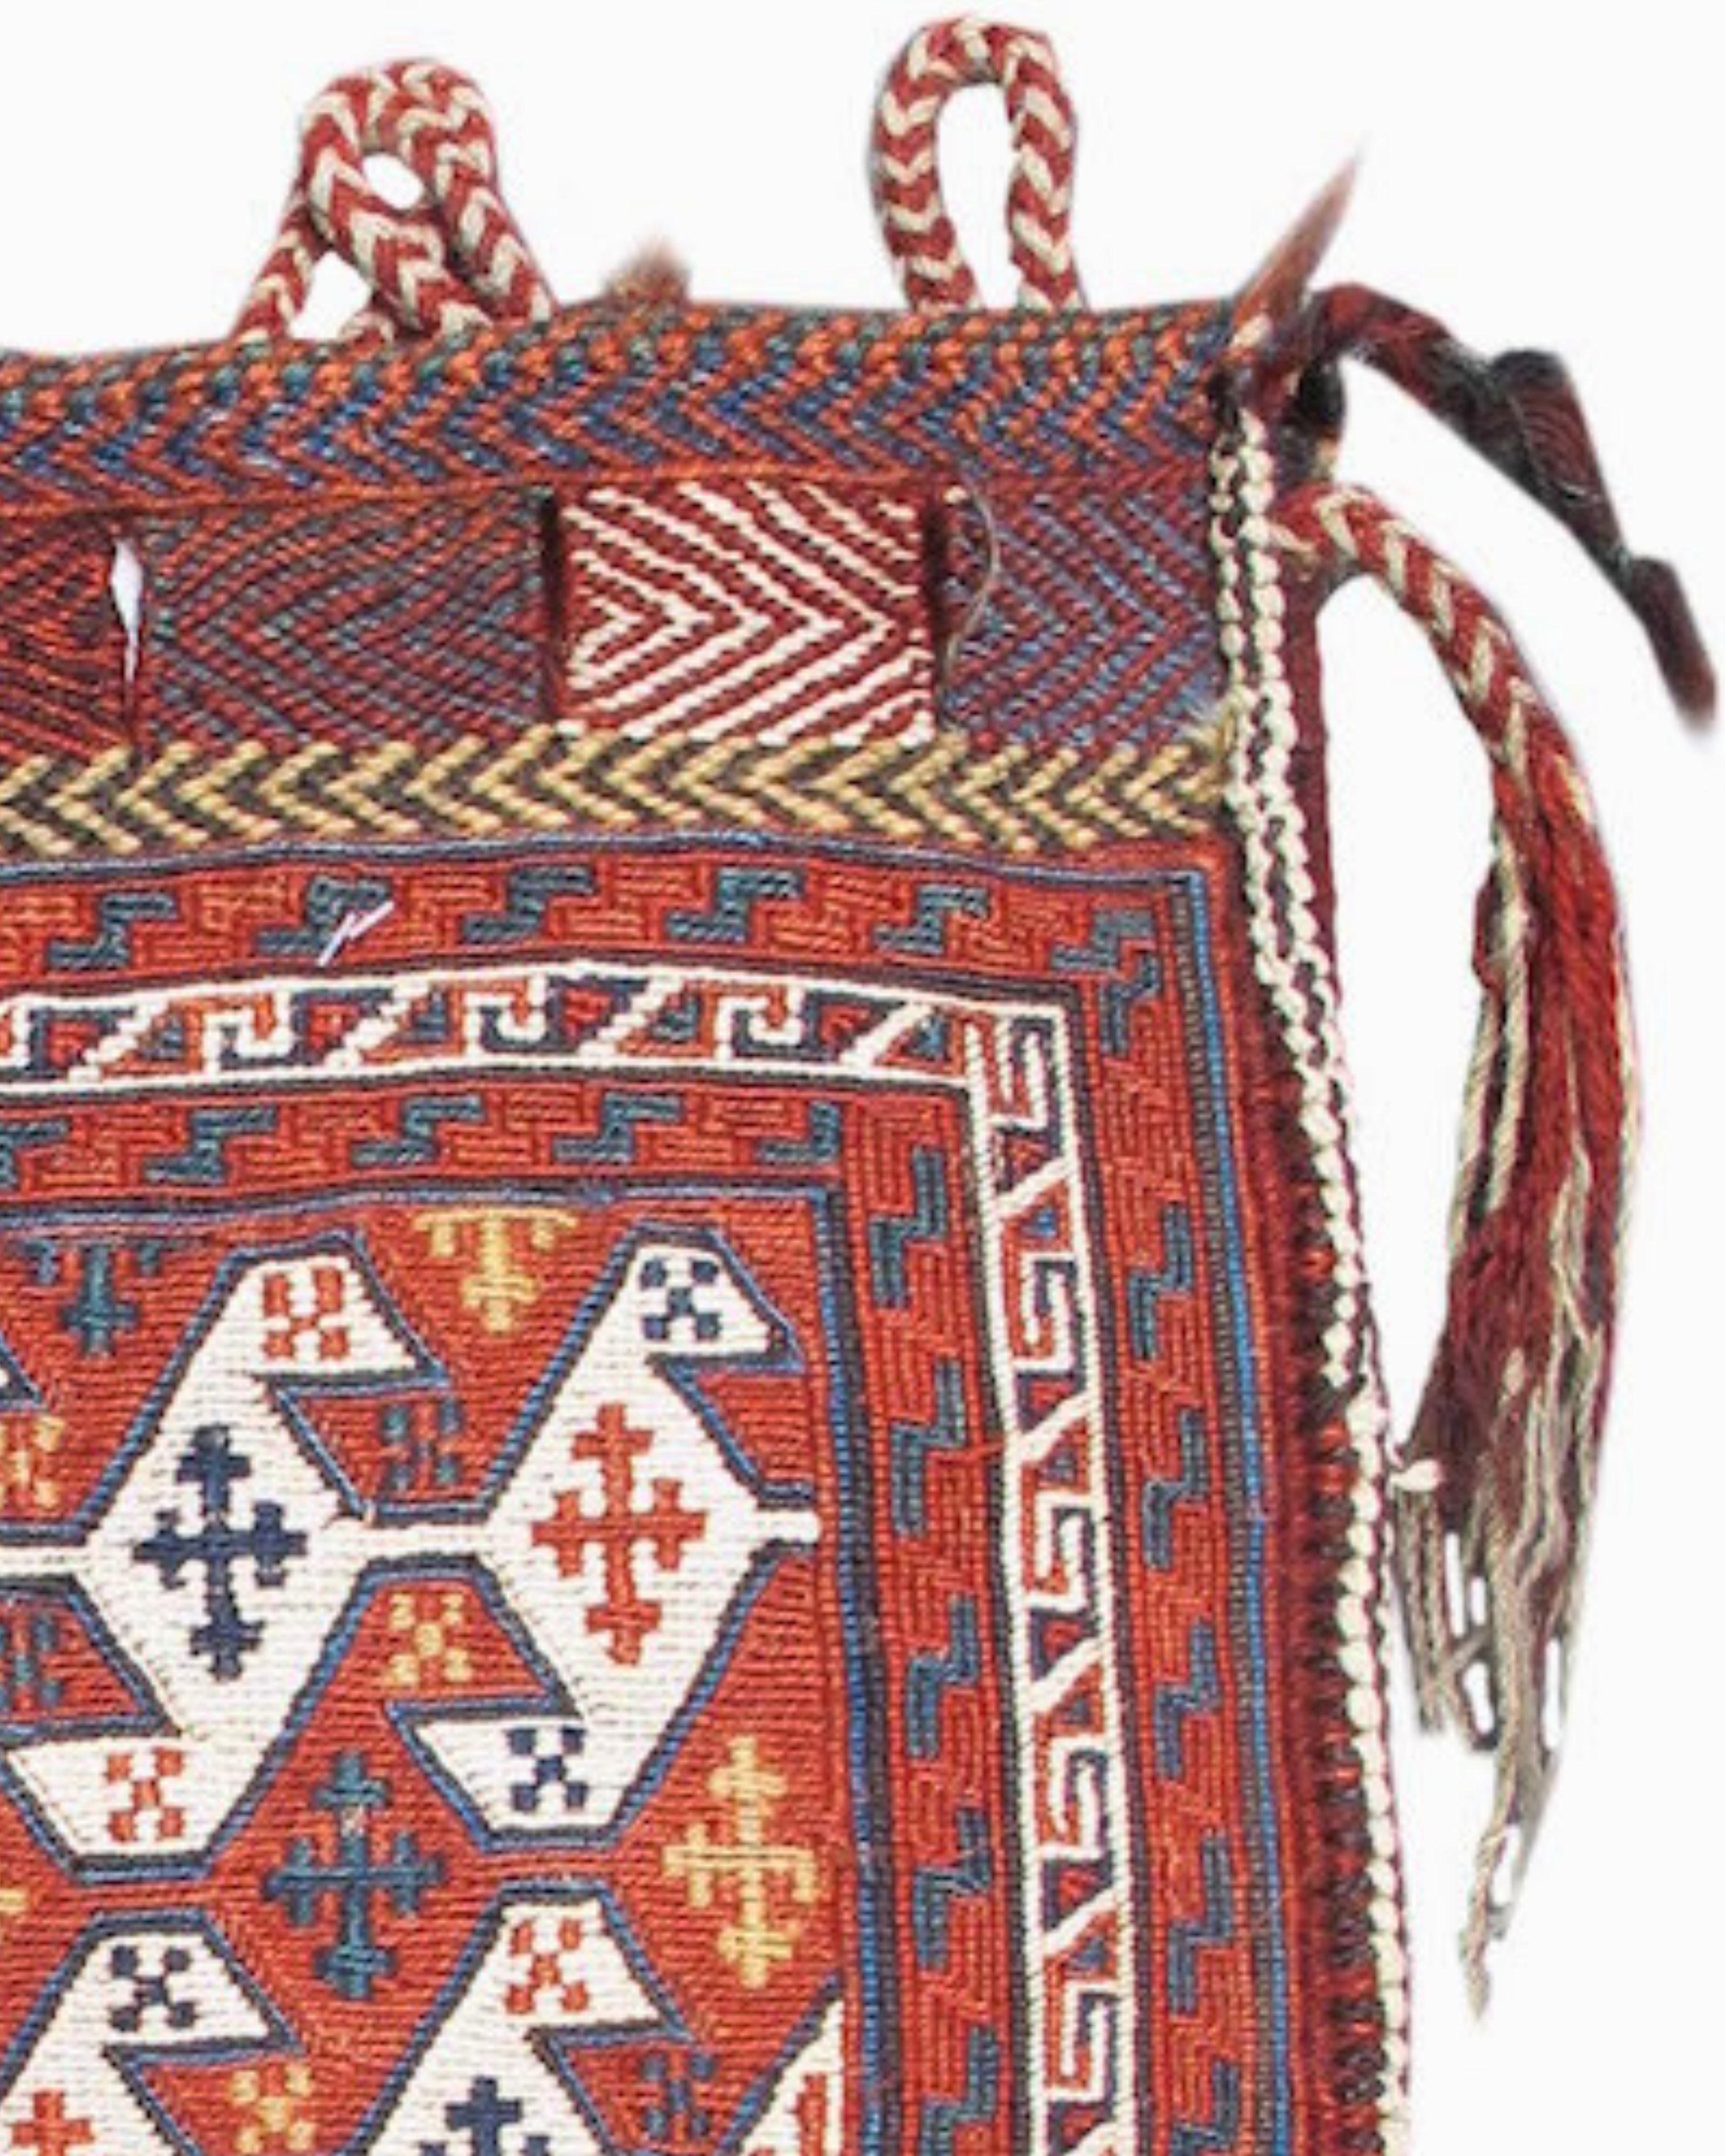 Afshar sumak Bag, Late 19th Century

Creating a distinct sense of motion, reciprocal bands of ïsirga, a linked-pinwheel motif, cross the field of this Afshar sumak. The cotton white provides a distinct contrast when paired with the madder-red wool,